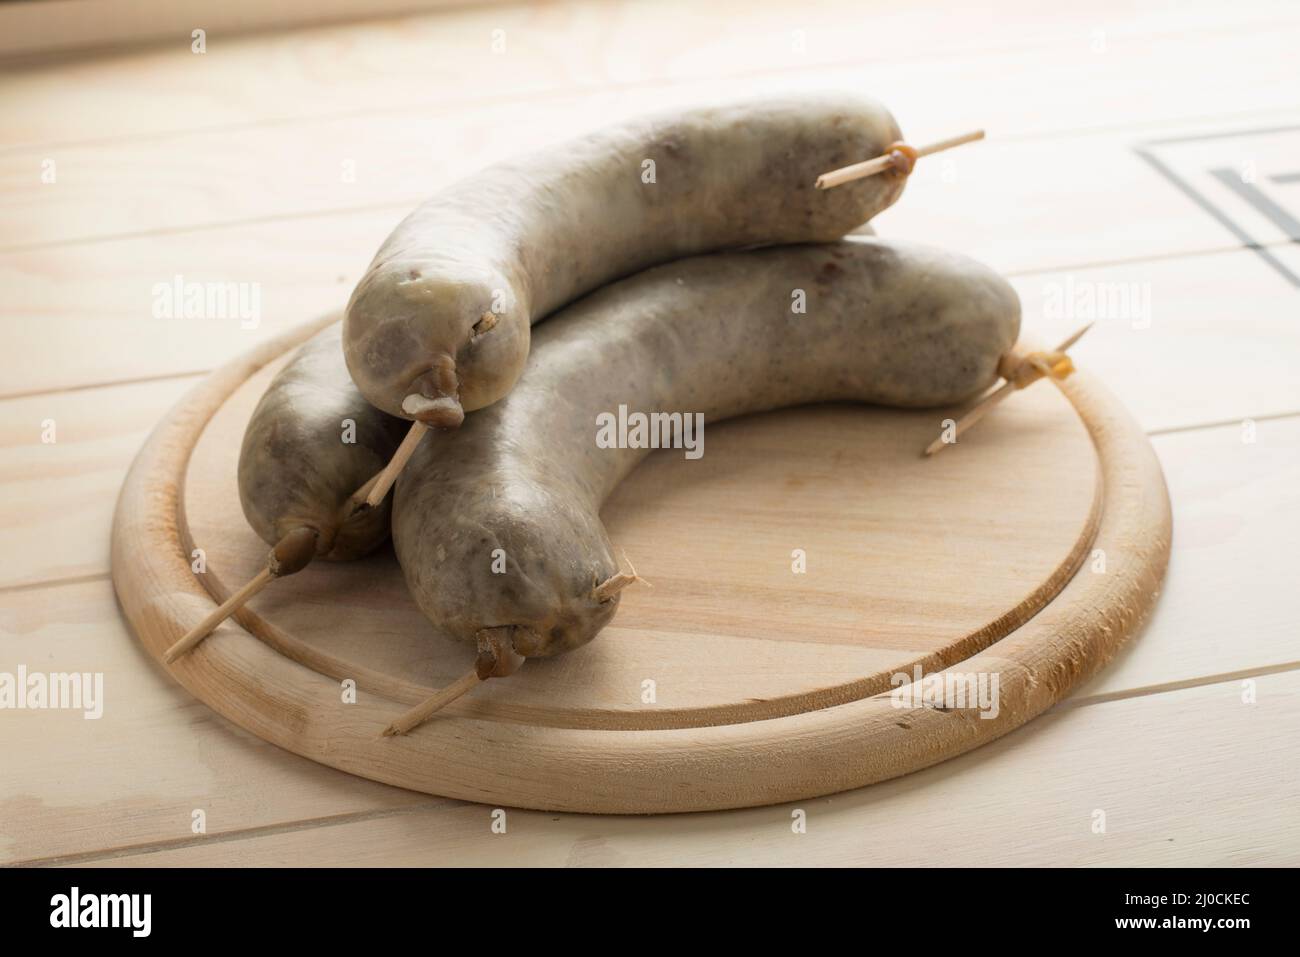 Tripe sausages, liver sausage served on a wooden board Stock Photo